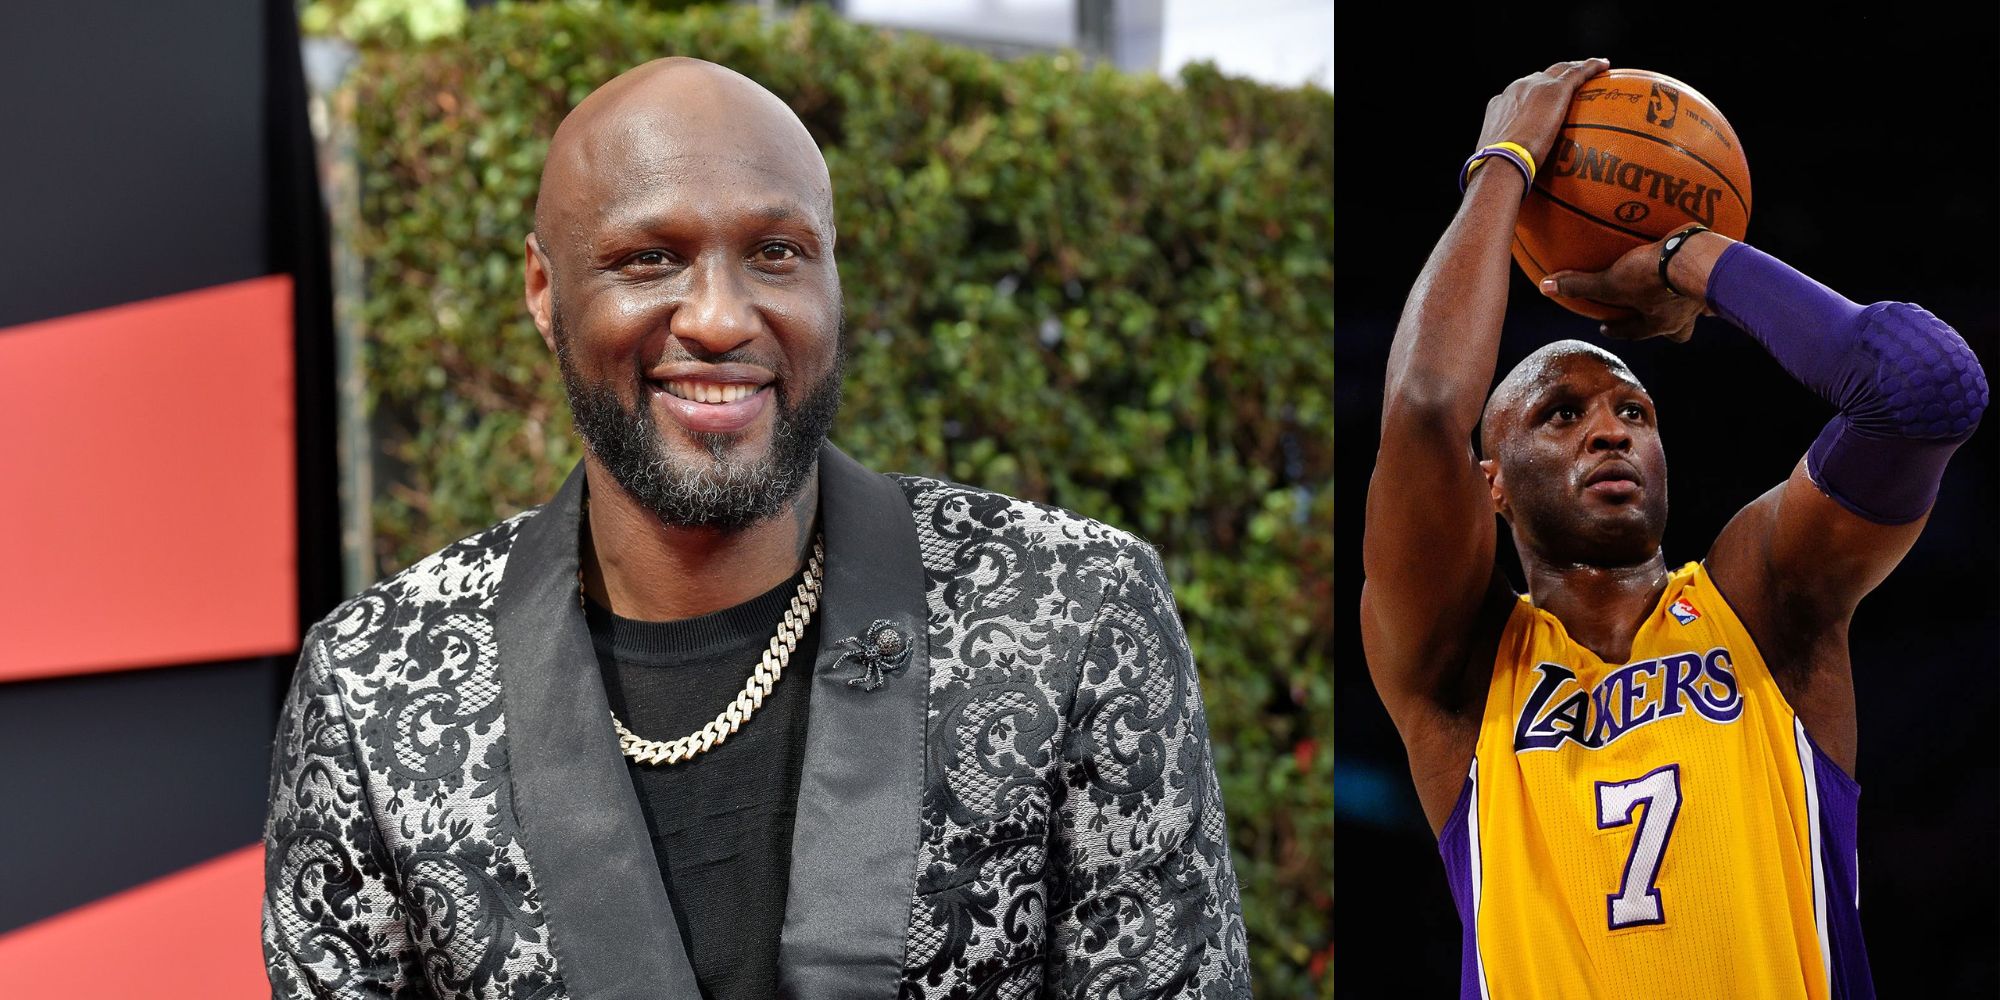 Who is Lamar Odom Dating Now?